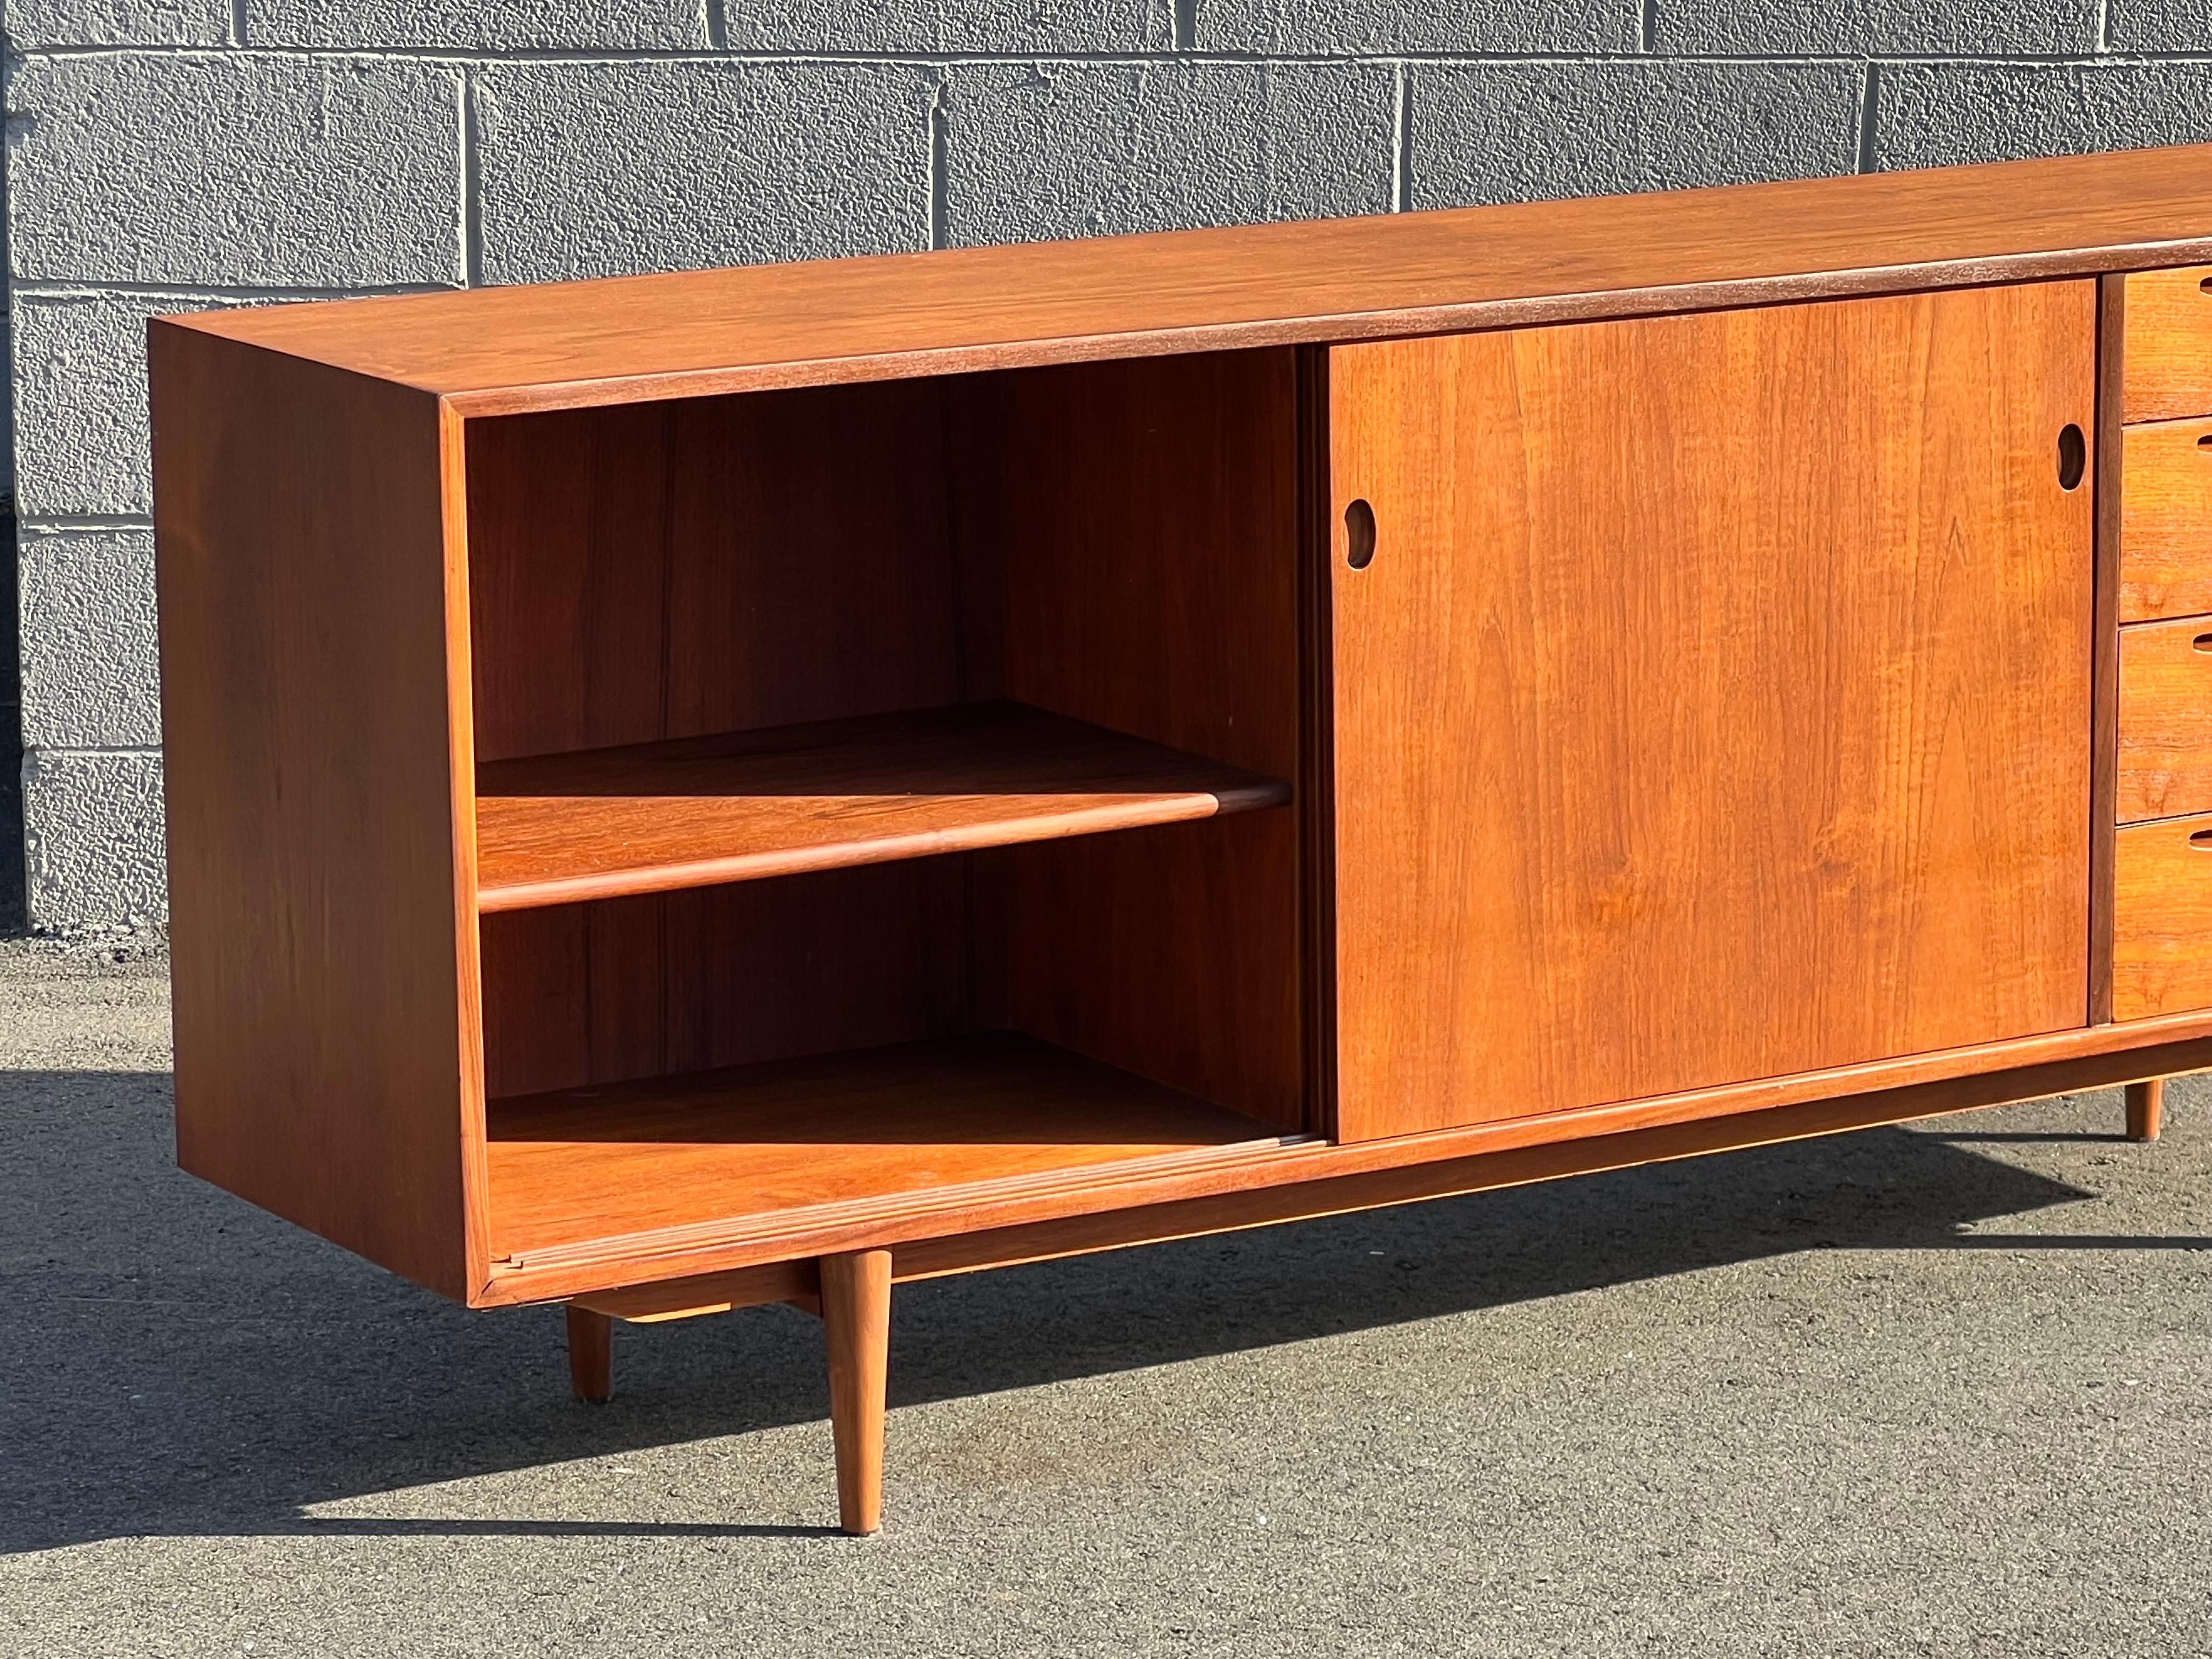 Mid-century rare teak credenza designed by Ib-Kofod Larsen for Clausen and Sons, Denmark. Equipped with two smooth sliding doors, four visible drawers, and two interior drawers. This credenza really hones in on the details. The door and drawer